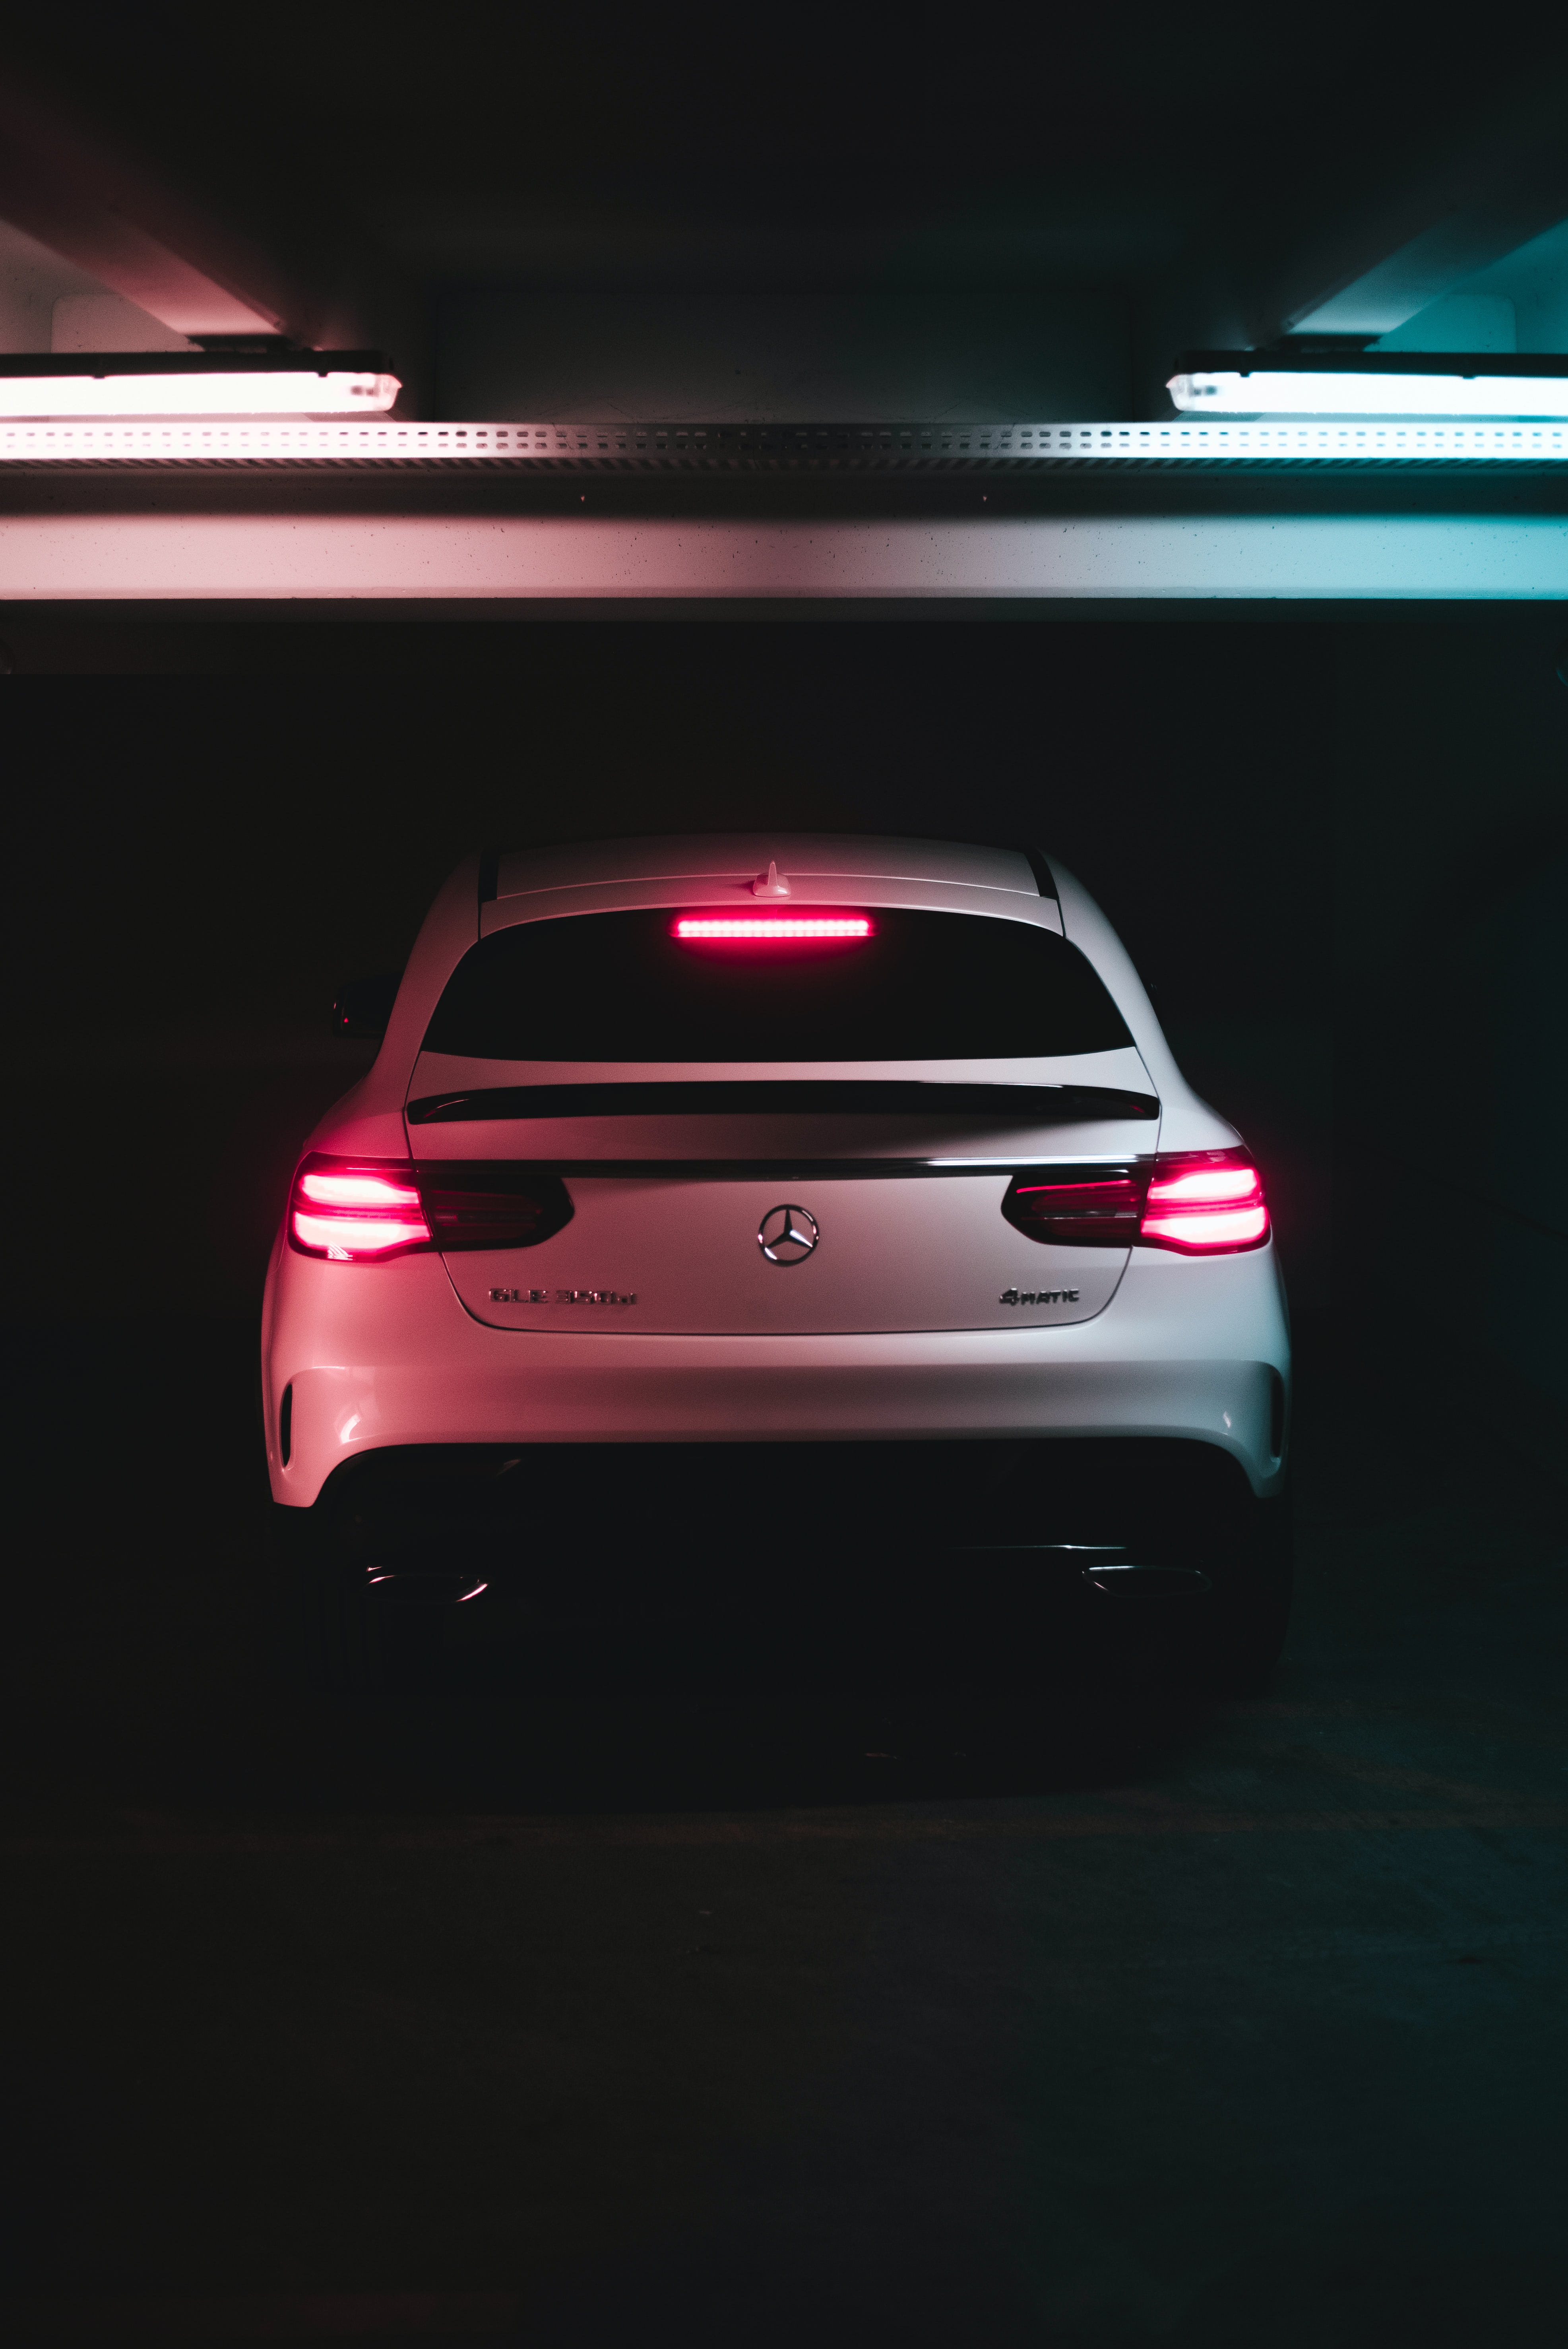 mercedes, lights, rear view, back view Ultrawide Wallpapers